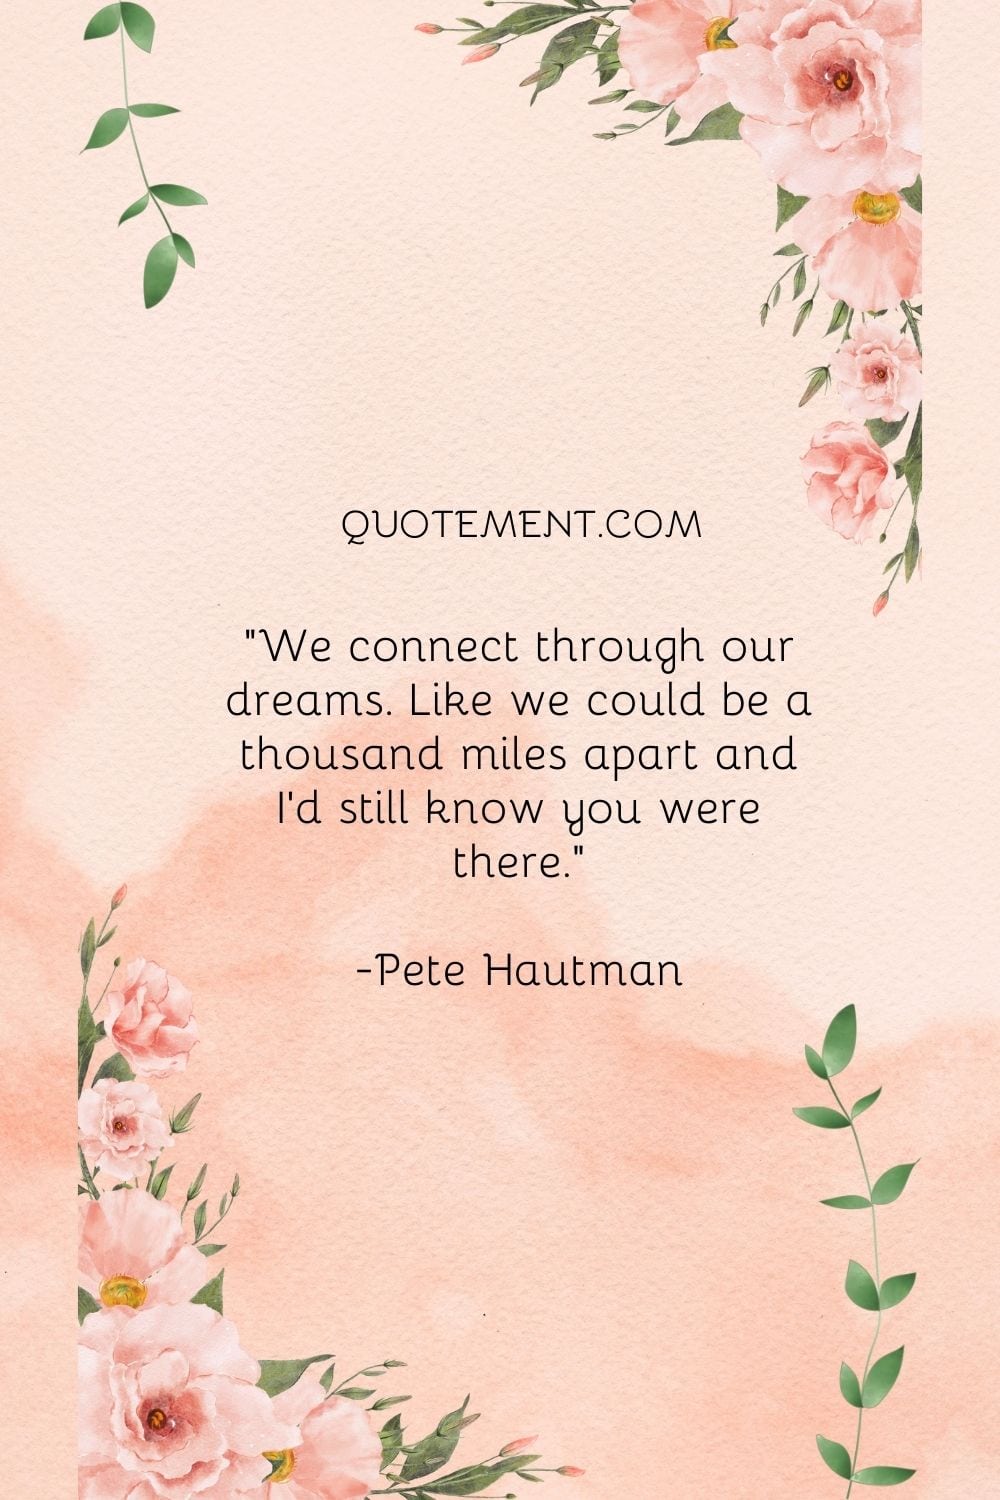 We connect through our dreams.